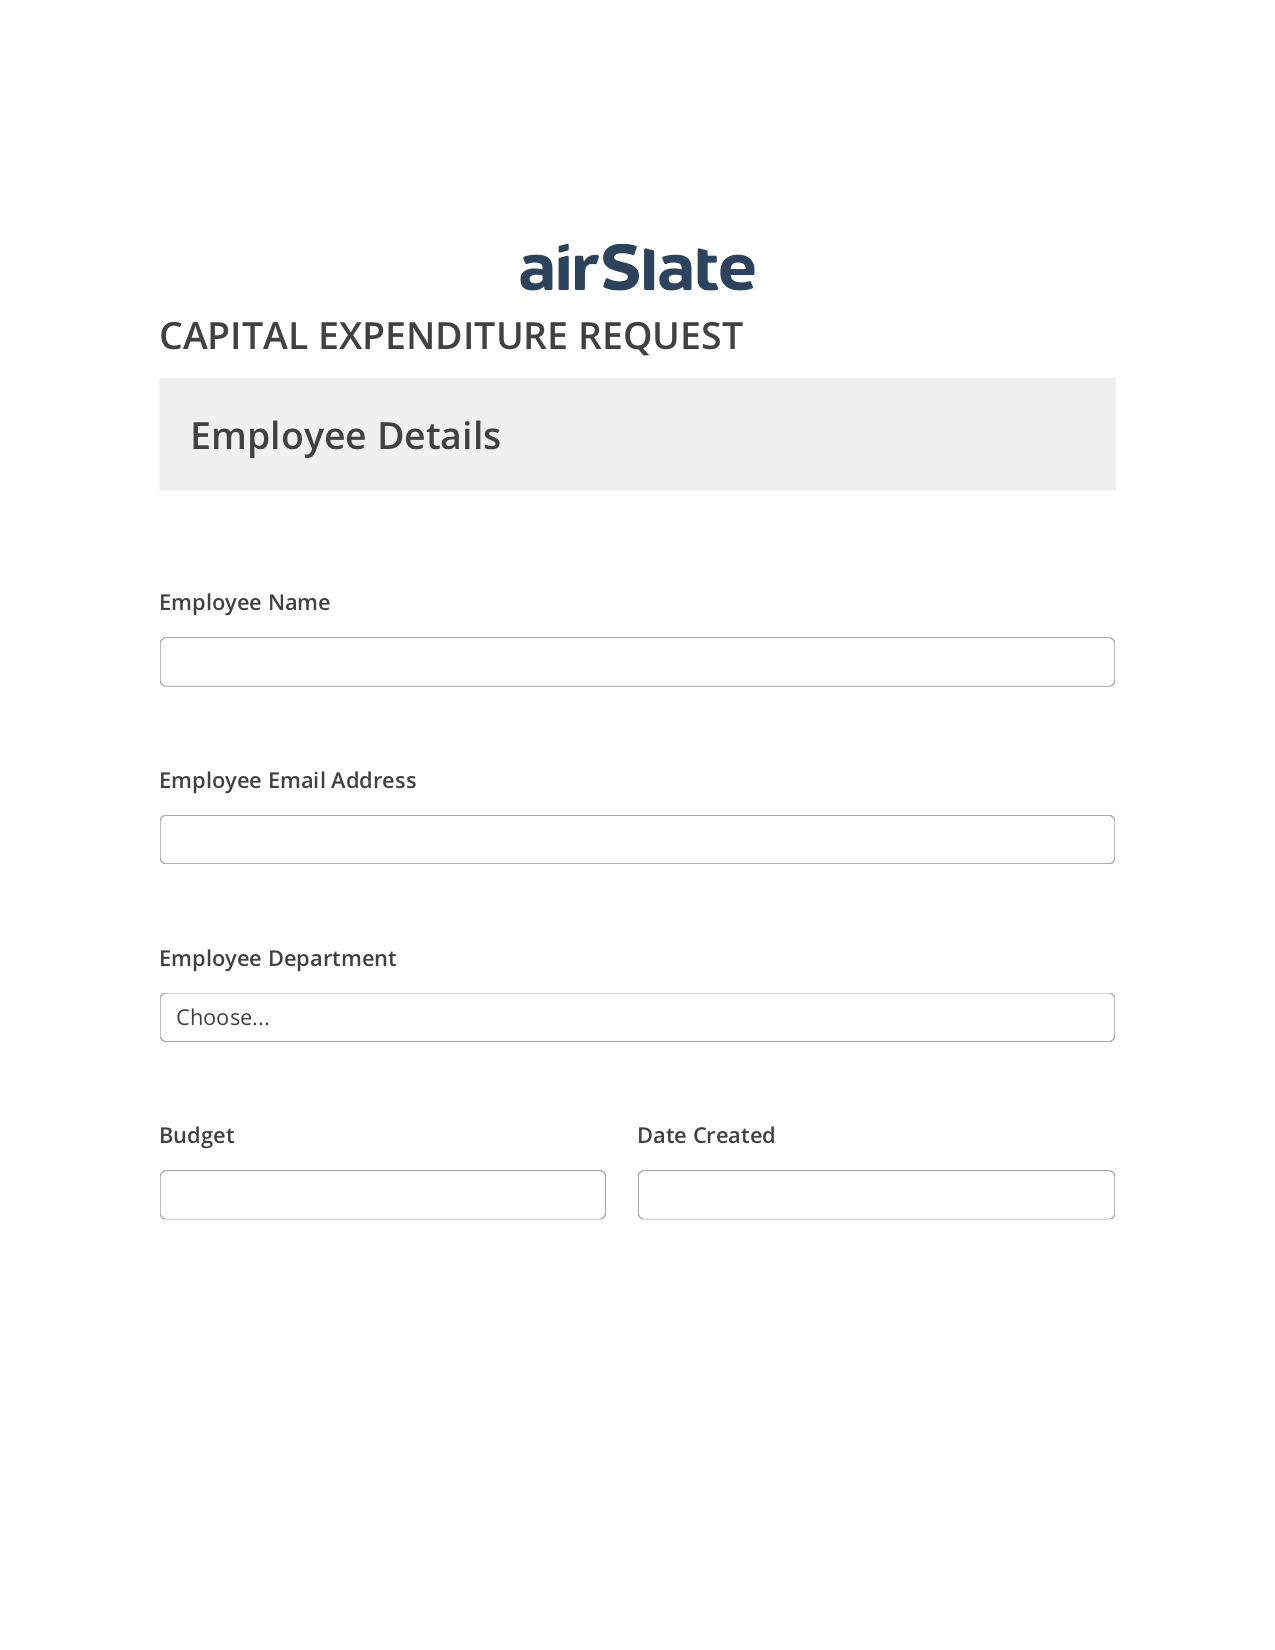 Capital Expenditure Request Approval Workflow Pre-fill from Excel Spreadsheet Dropdown Options Bot, Mailchimp send Campaign bot, Archive to Box Bot